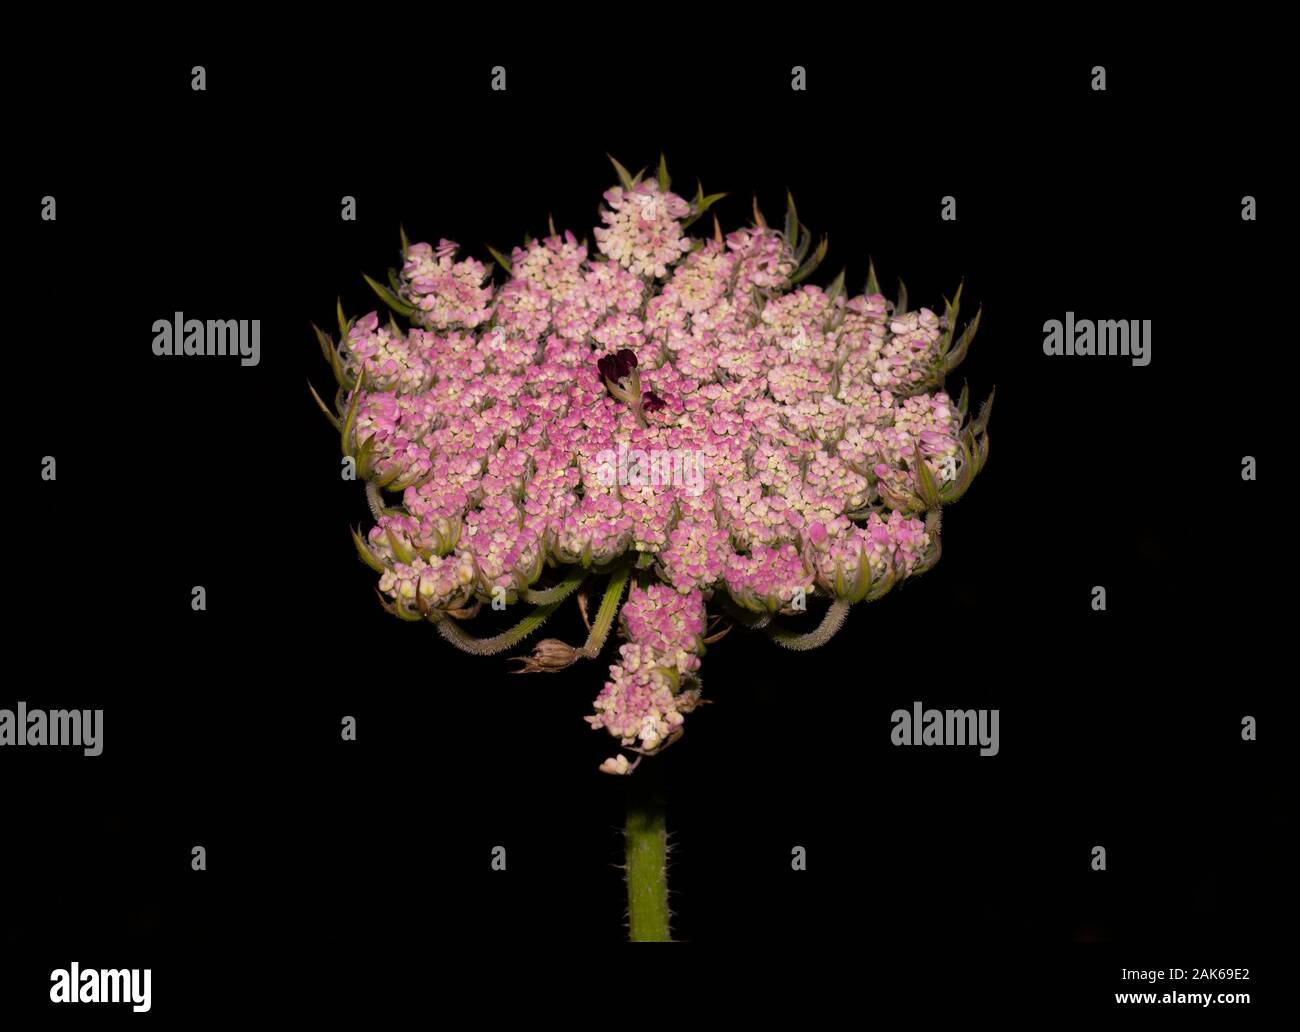 Close-up of an umbel inflorescence with pink and white flowers, with black background Stock Photo